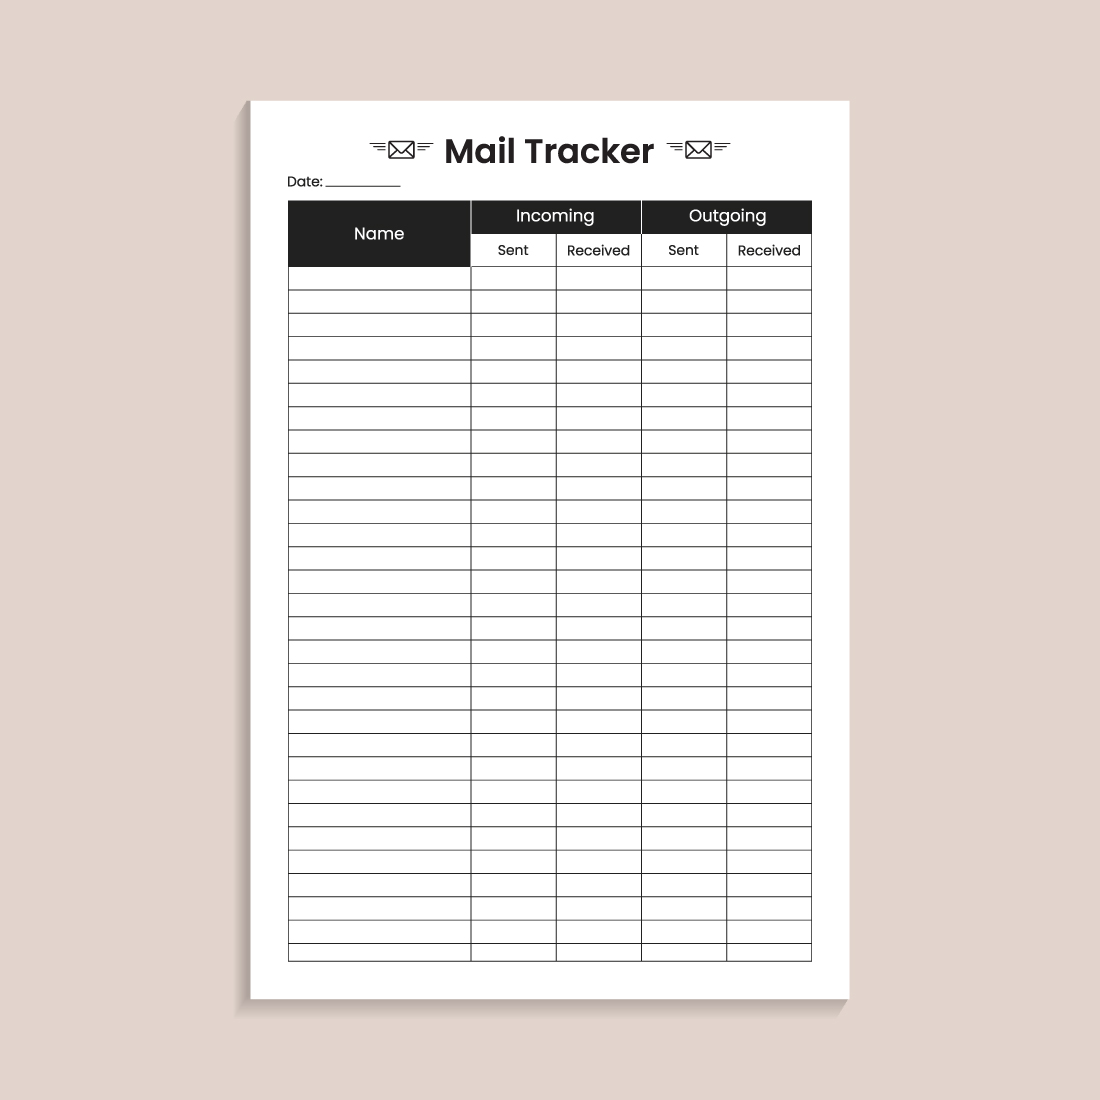 Mail Tracker KDP Interior cover